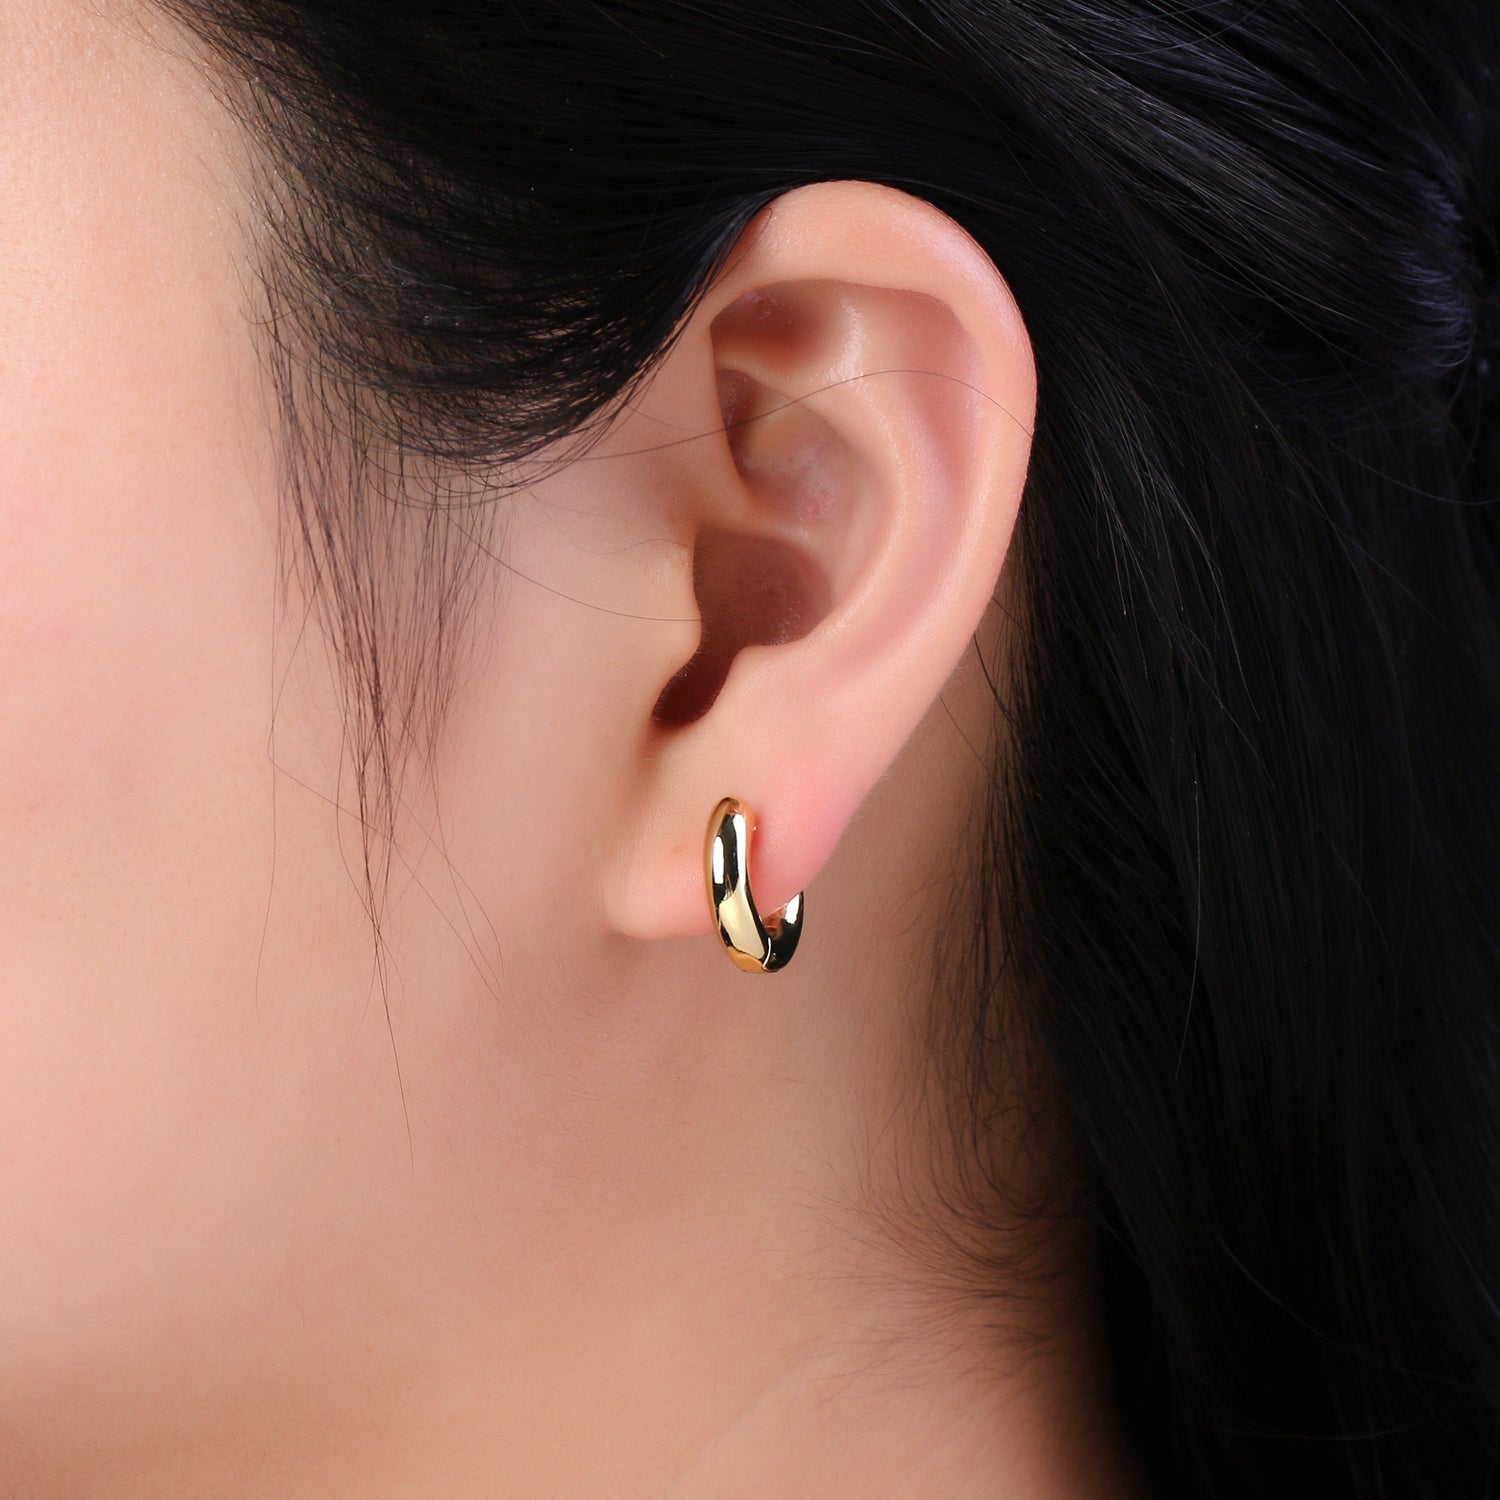 Minimalist Earring Gold Hoop Earrings • Perfect Simple Earrings For Her • Gifts for Her T-363 - DLUXCA